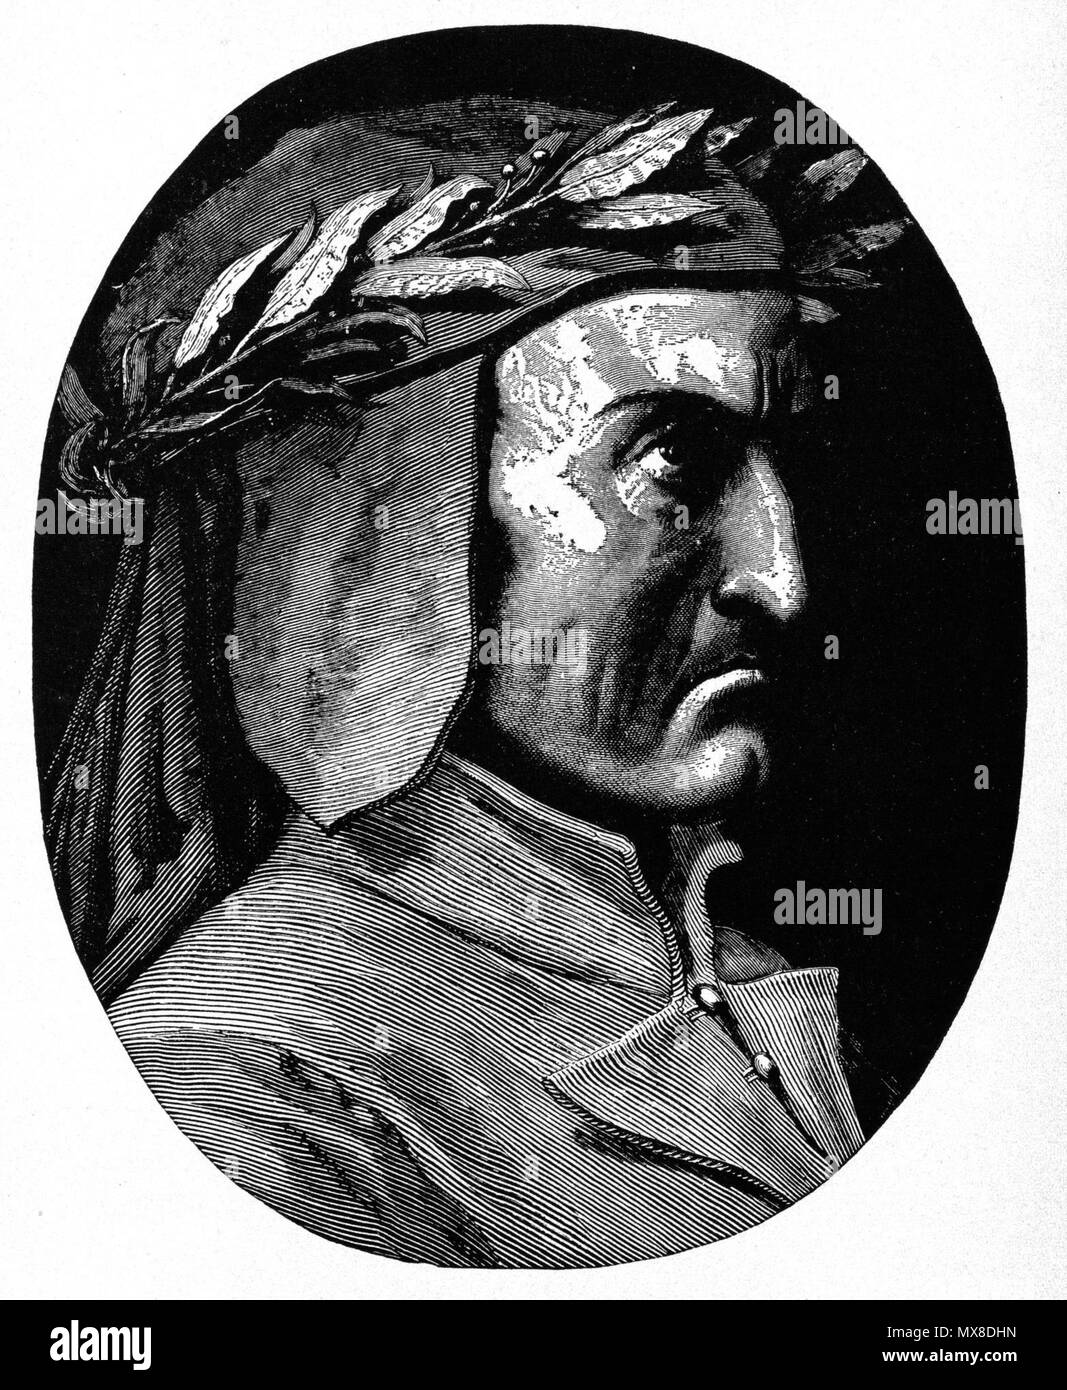 . High resolution scan of engraving by Gustave Doré portraying Dante Alighieri. 30 January 2008. scanned, post-processed, and uploaded Karl Hahn 174 DVDanteAlighieriPortrait m Stock Photo